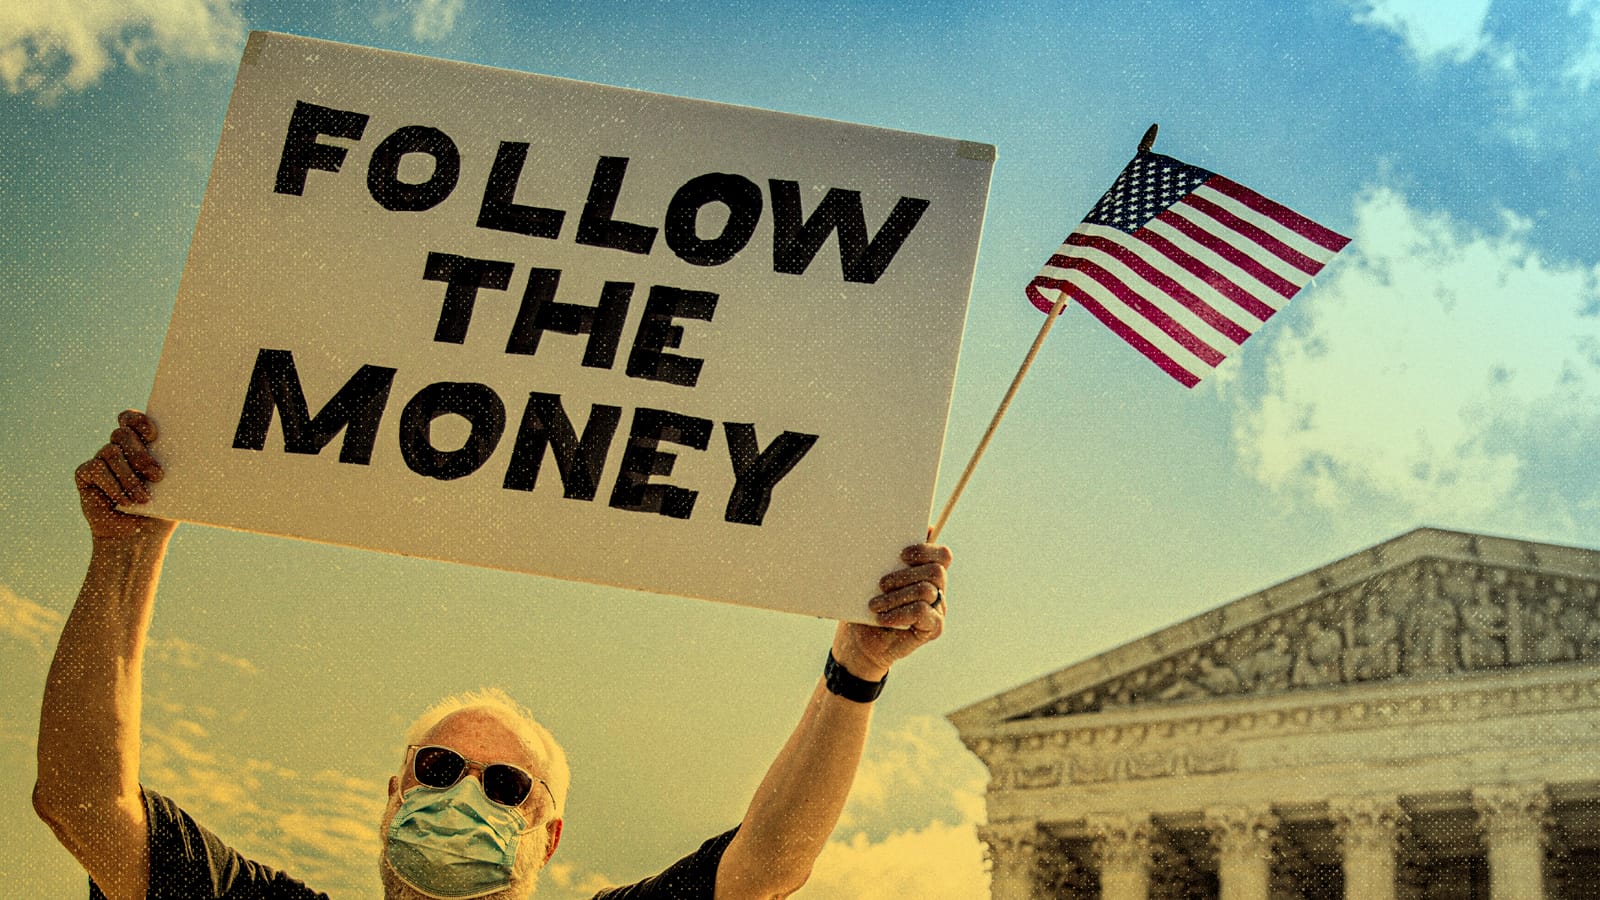 A protester holds up a sign that reads “Follow the Money” outside the Supreme Court.